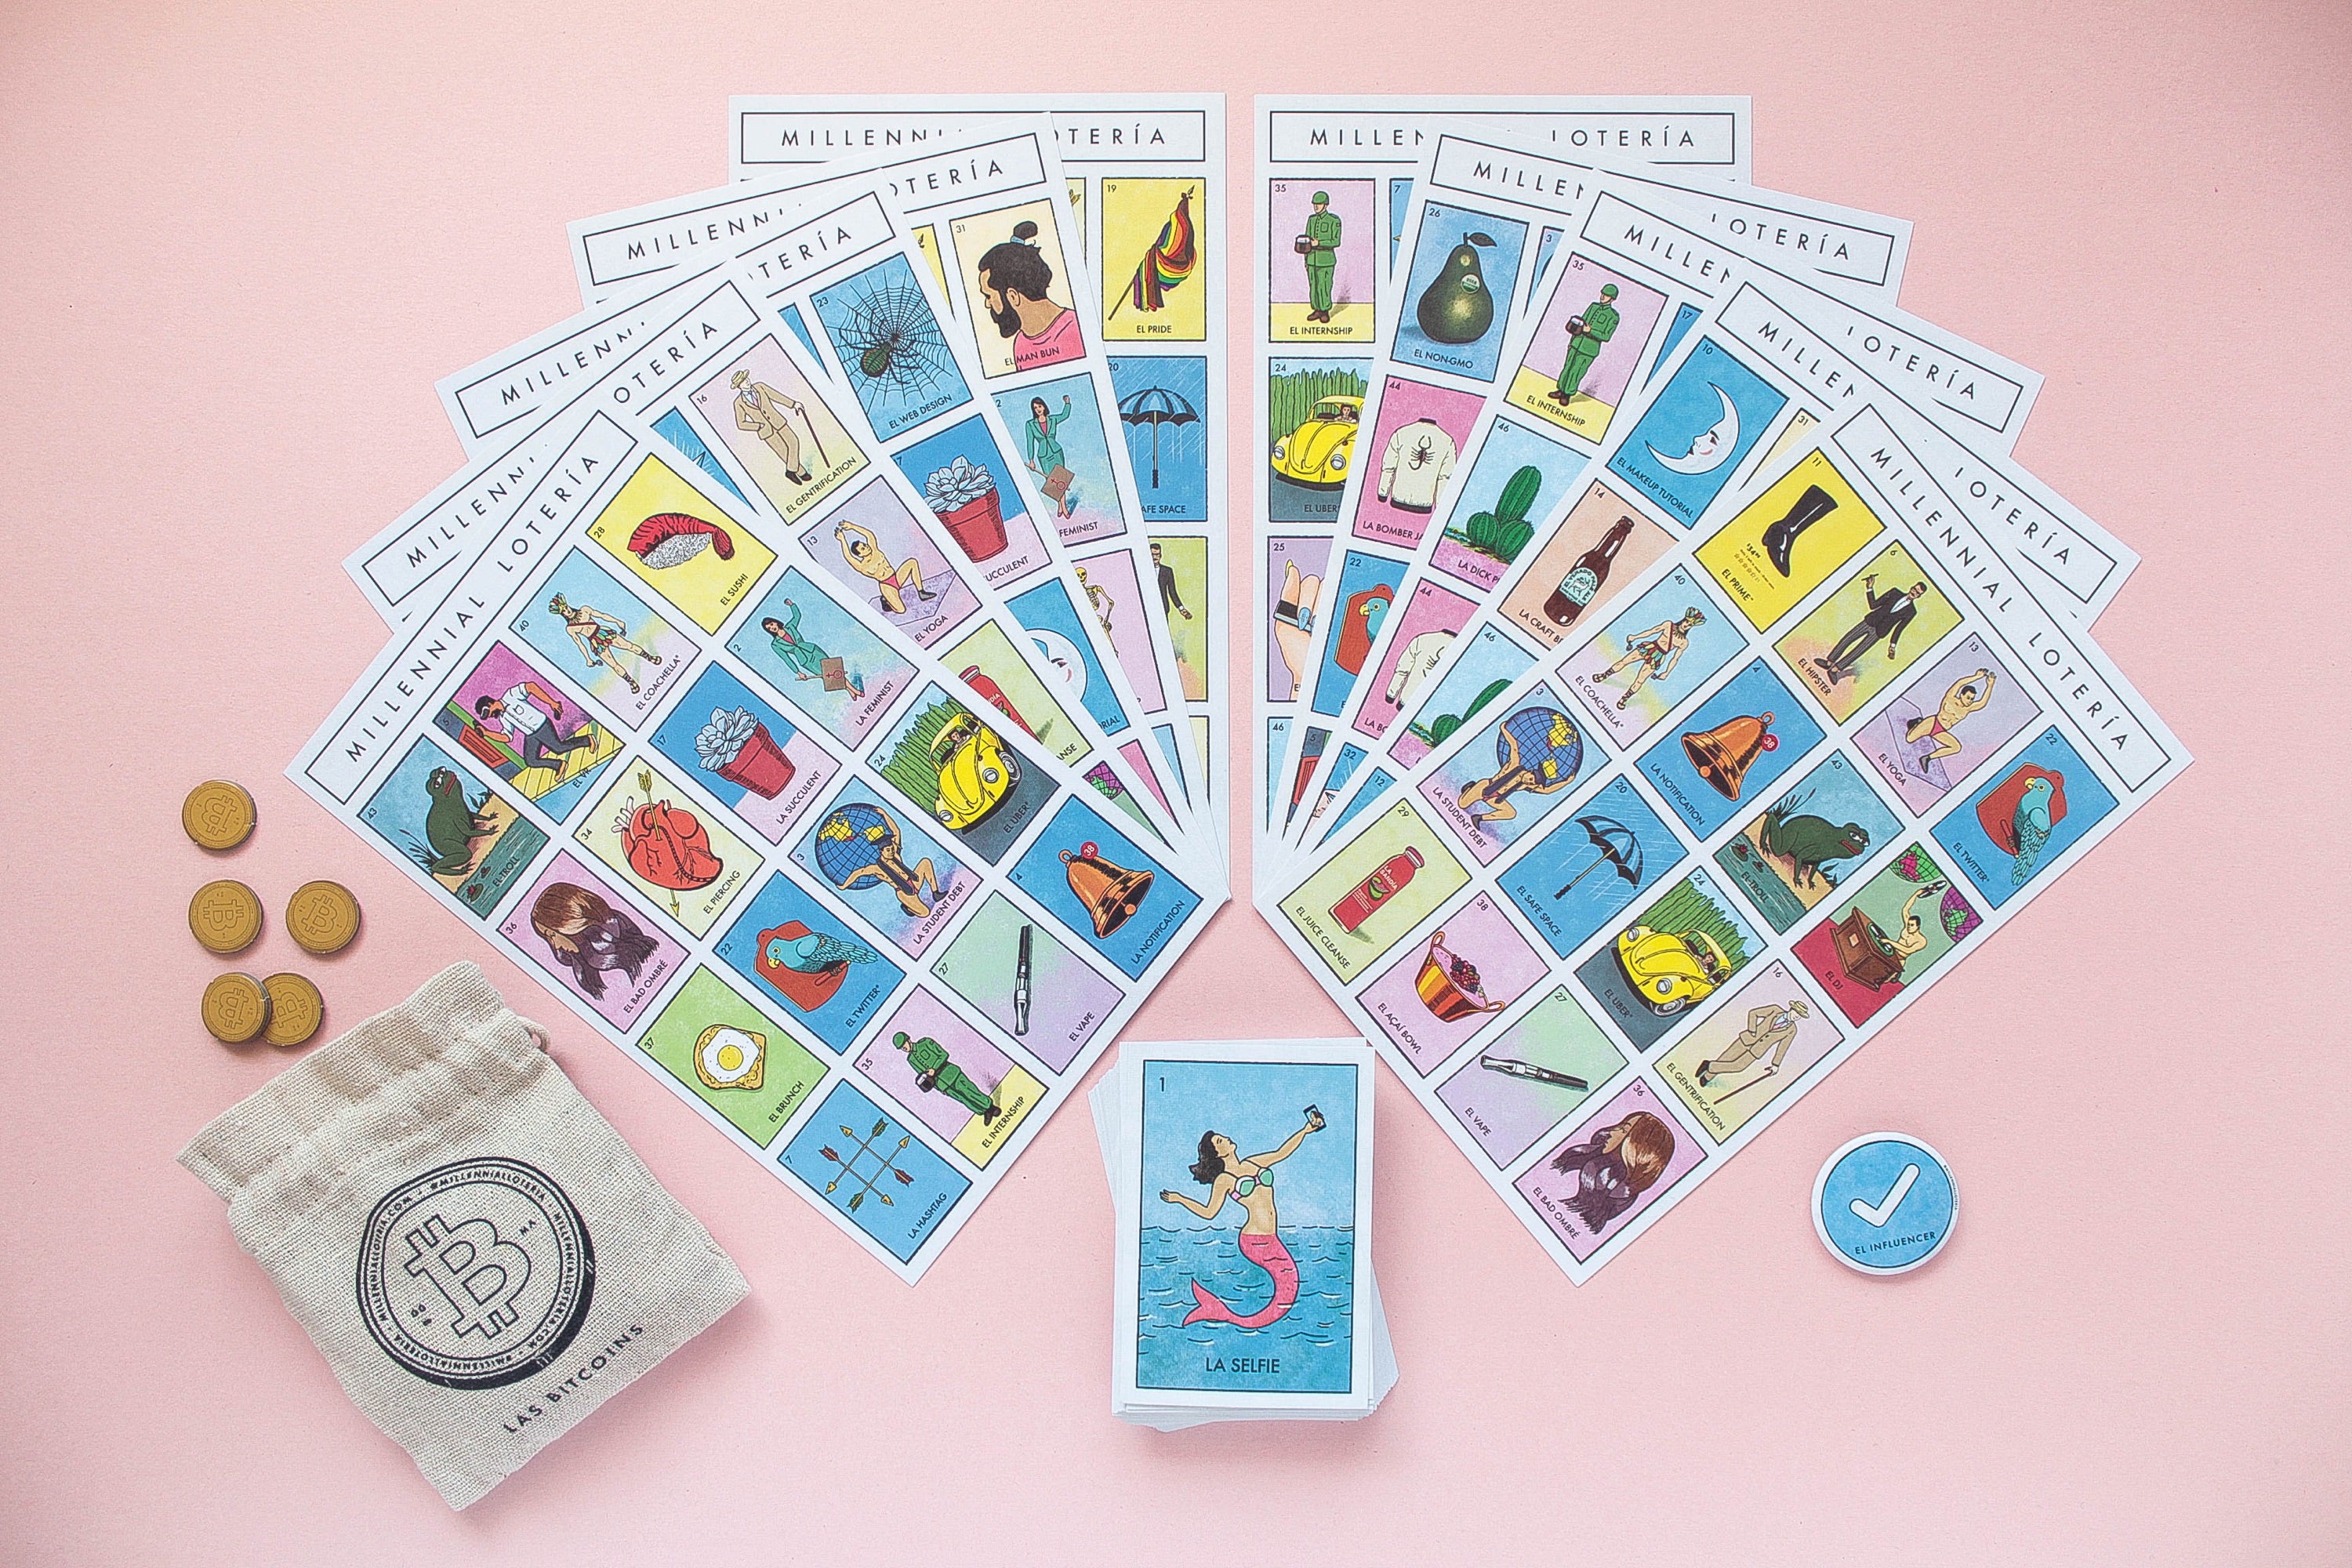 A set of Millennial Loteria cards and coins fanned out on a pink background